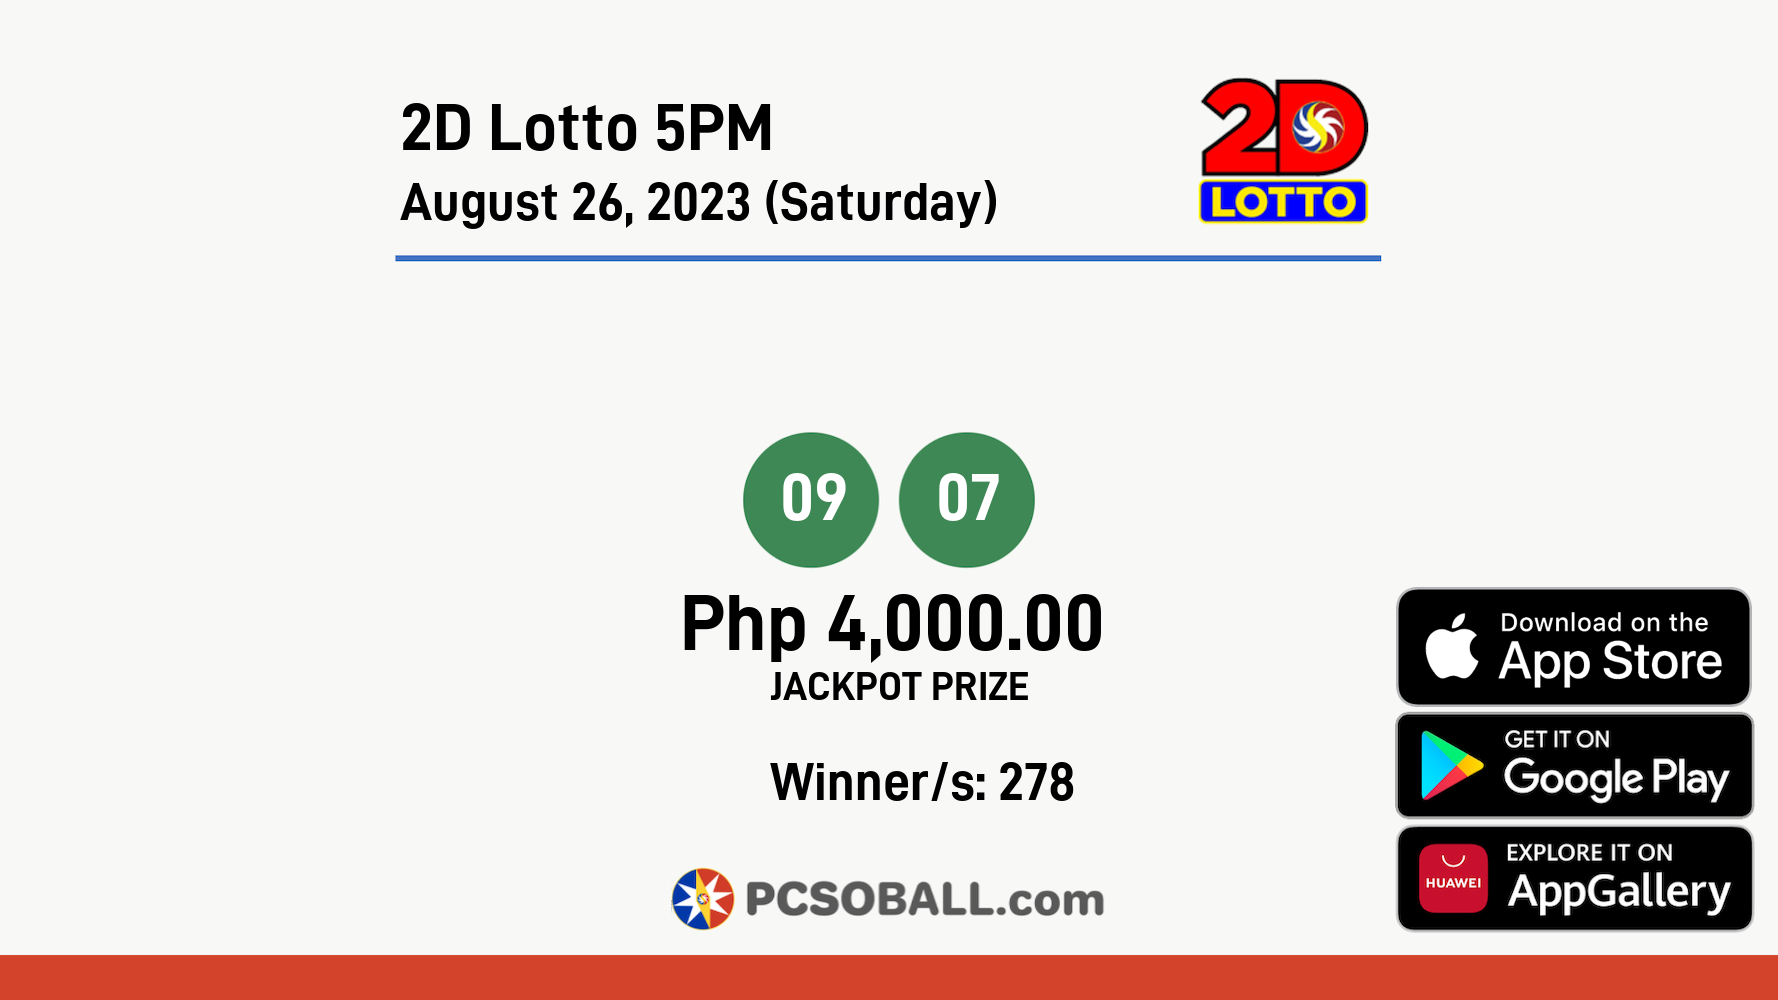 2D Lotto 5PM August 26, 2023 (Saturday) Result